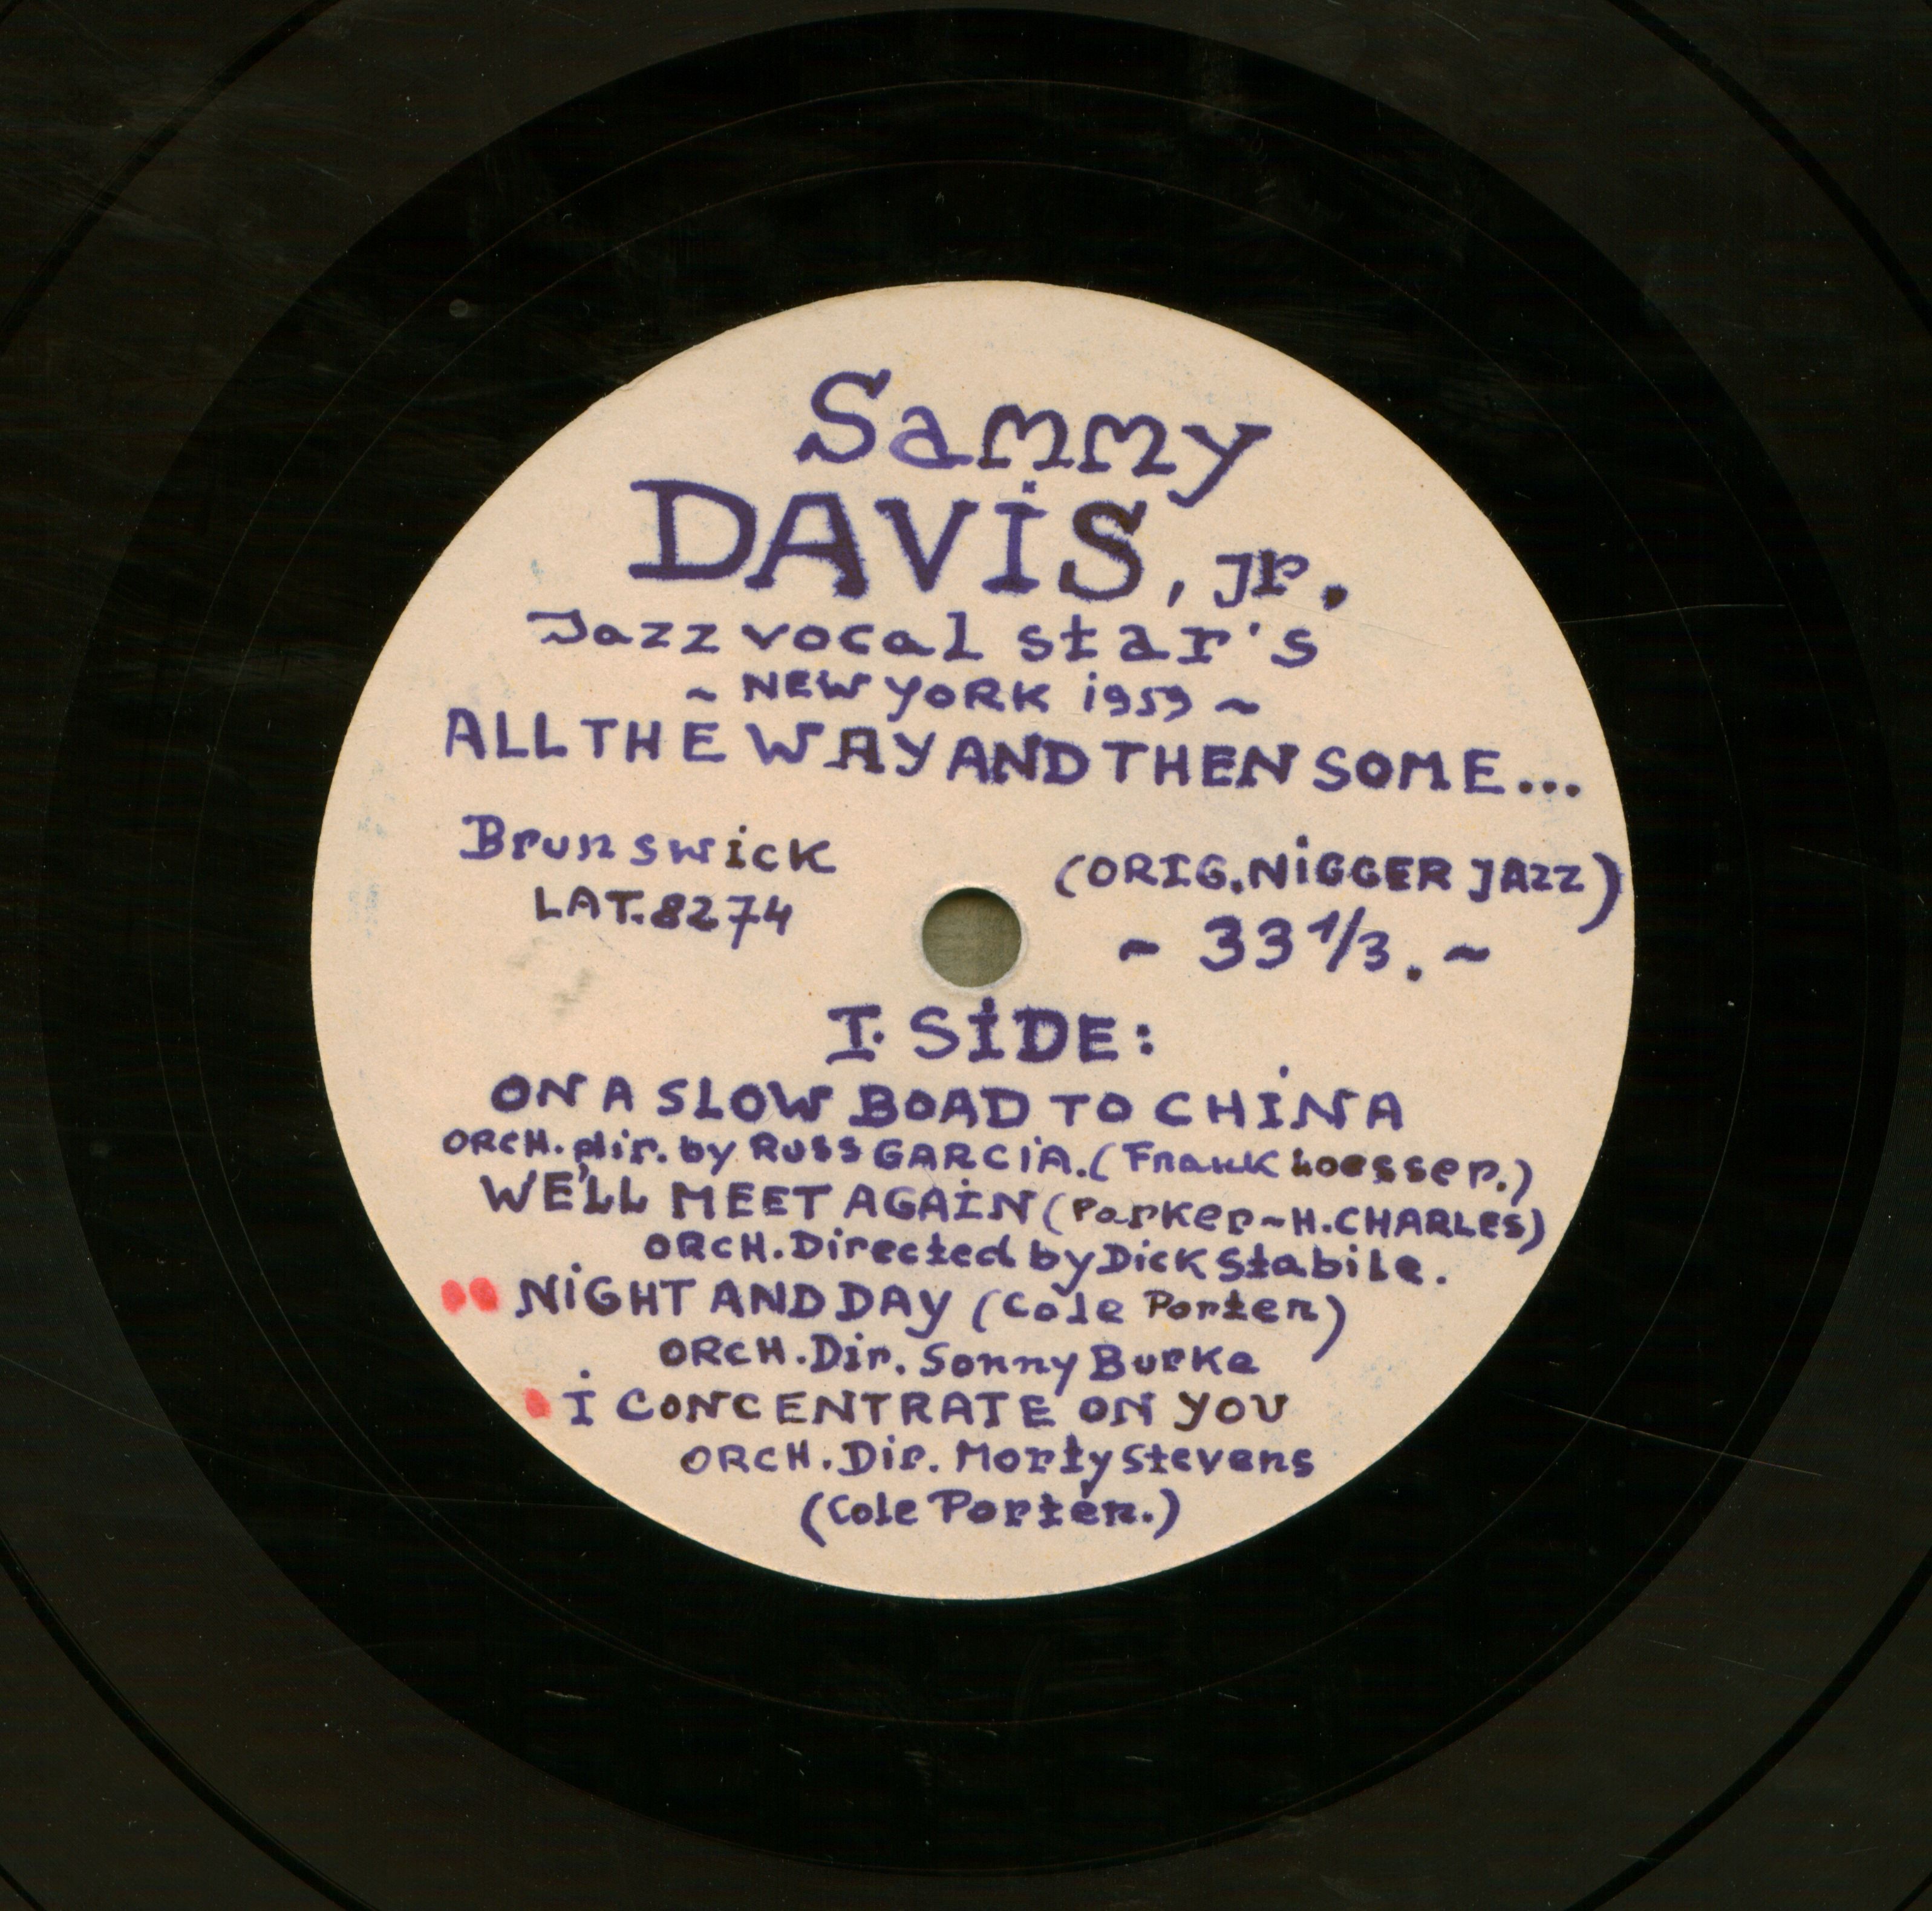 Sammy Davis jr. jazz vocal star's New York 1959 : All the way and then some...